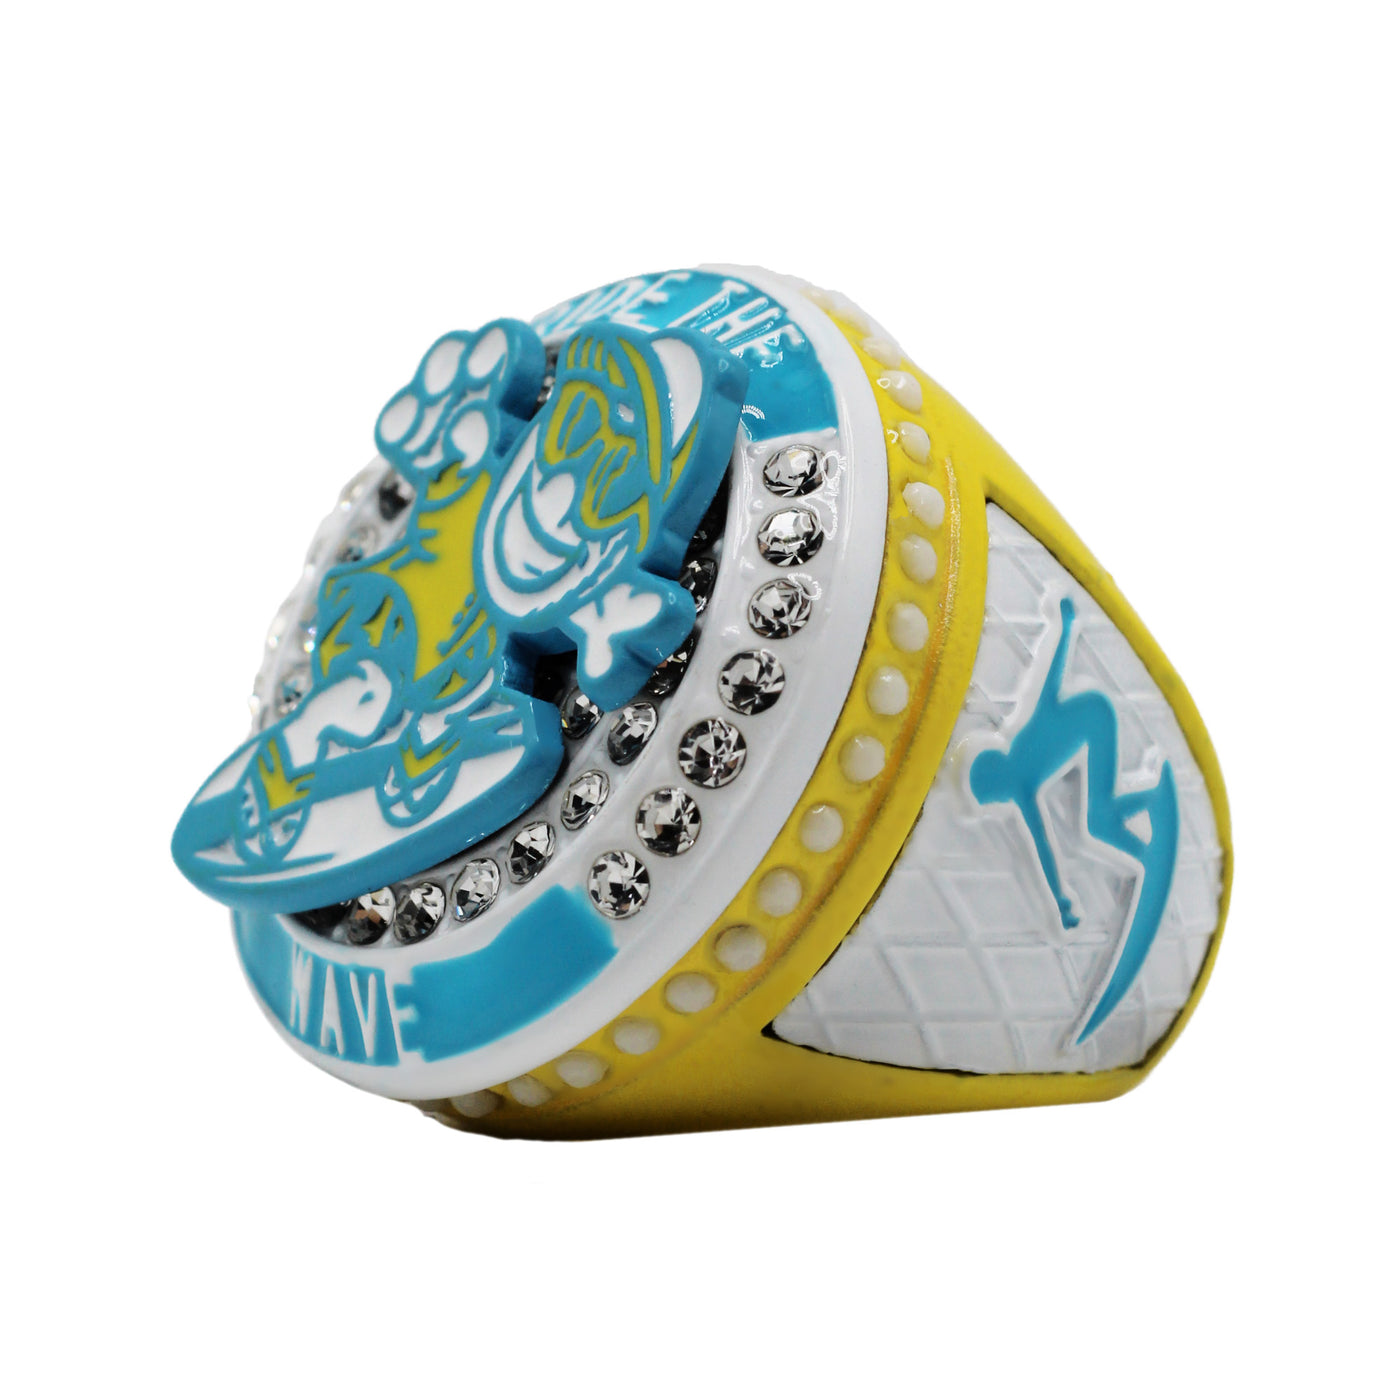 RIDE THE WAVE 2 RING